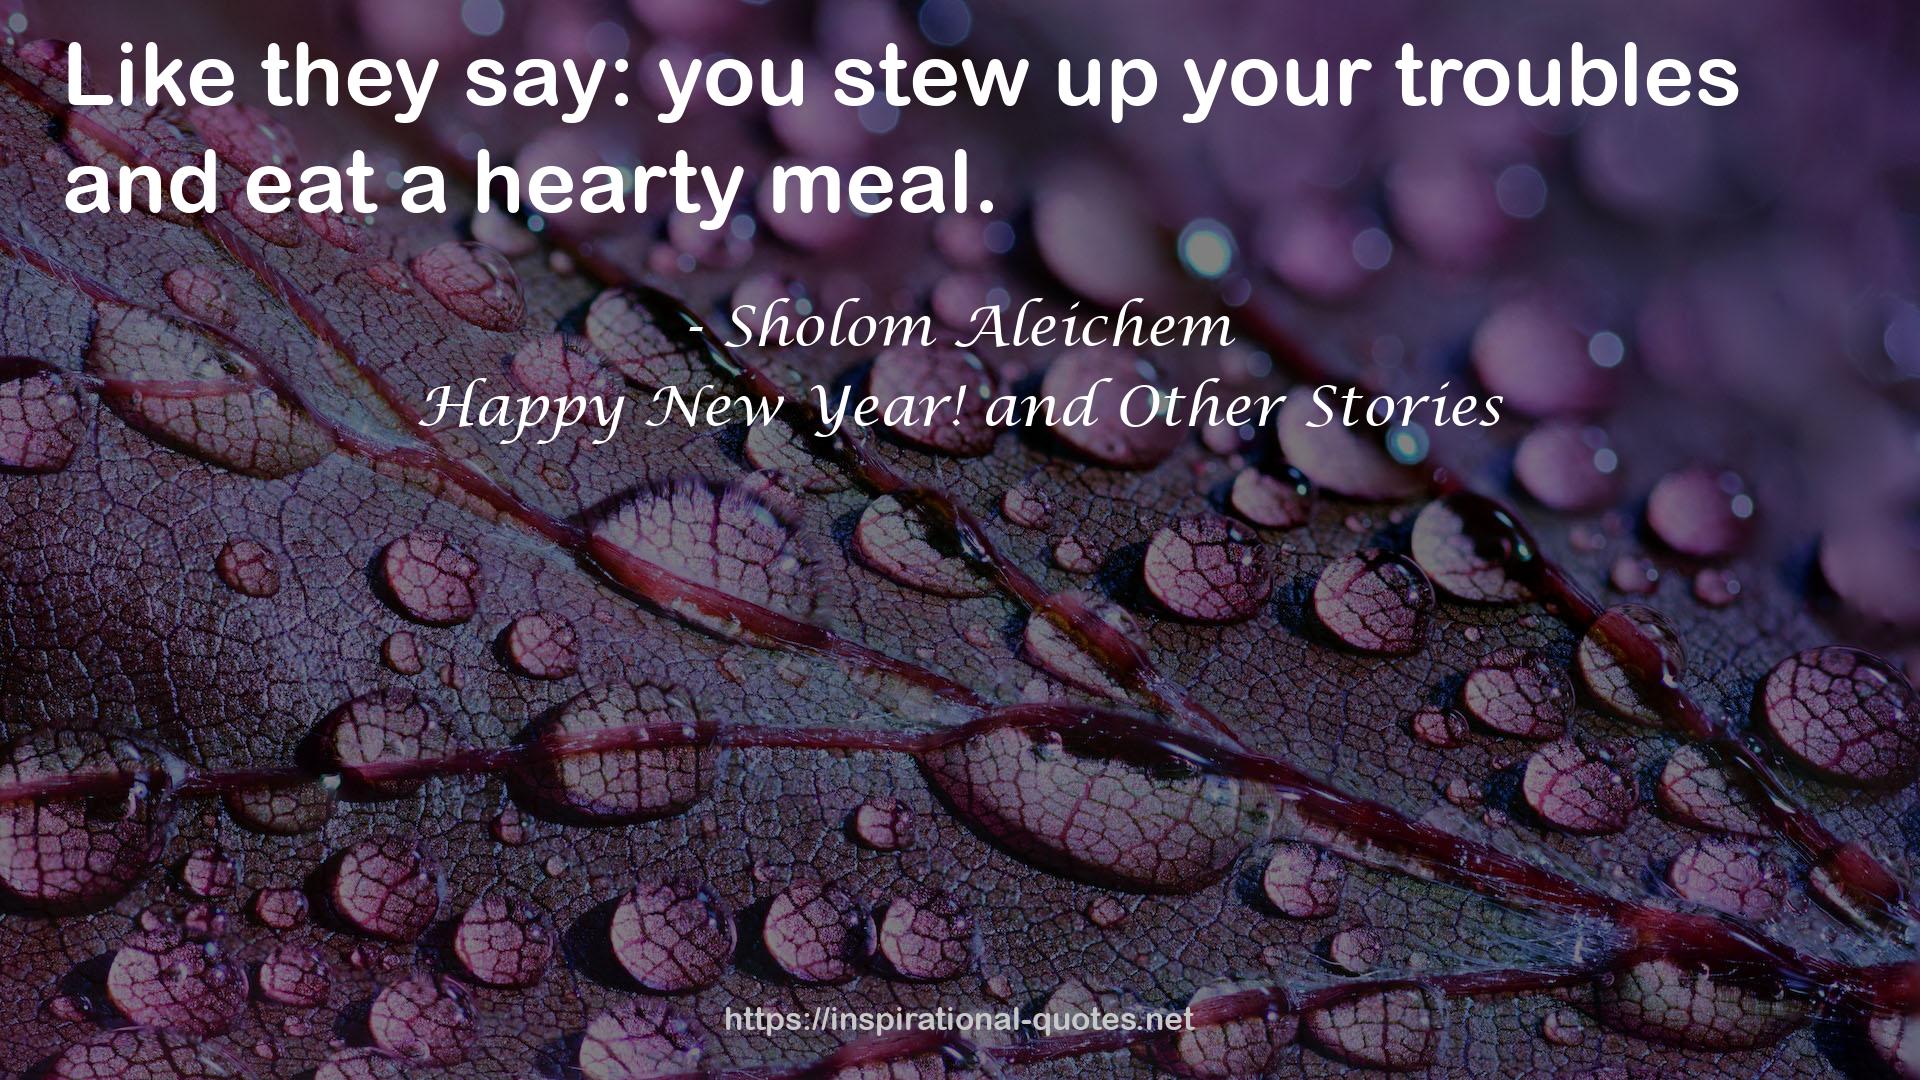 Happy New Year! and Other Stories QUOTES